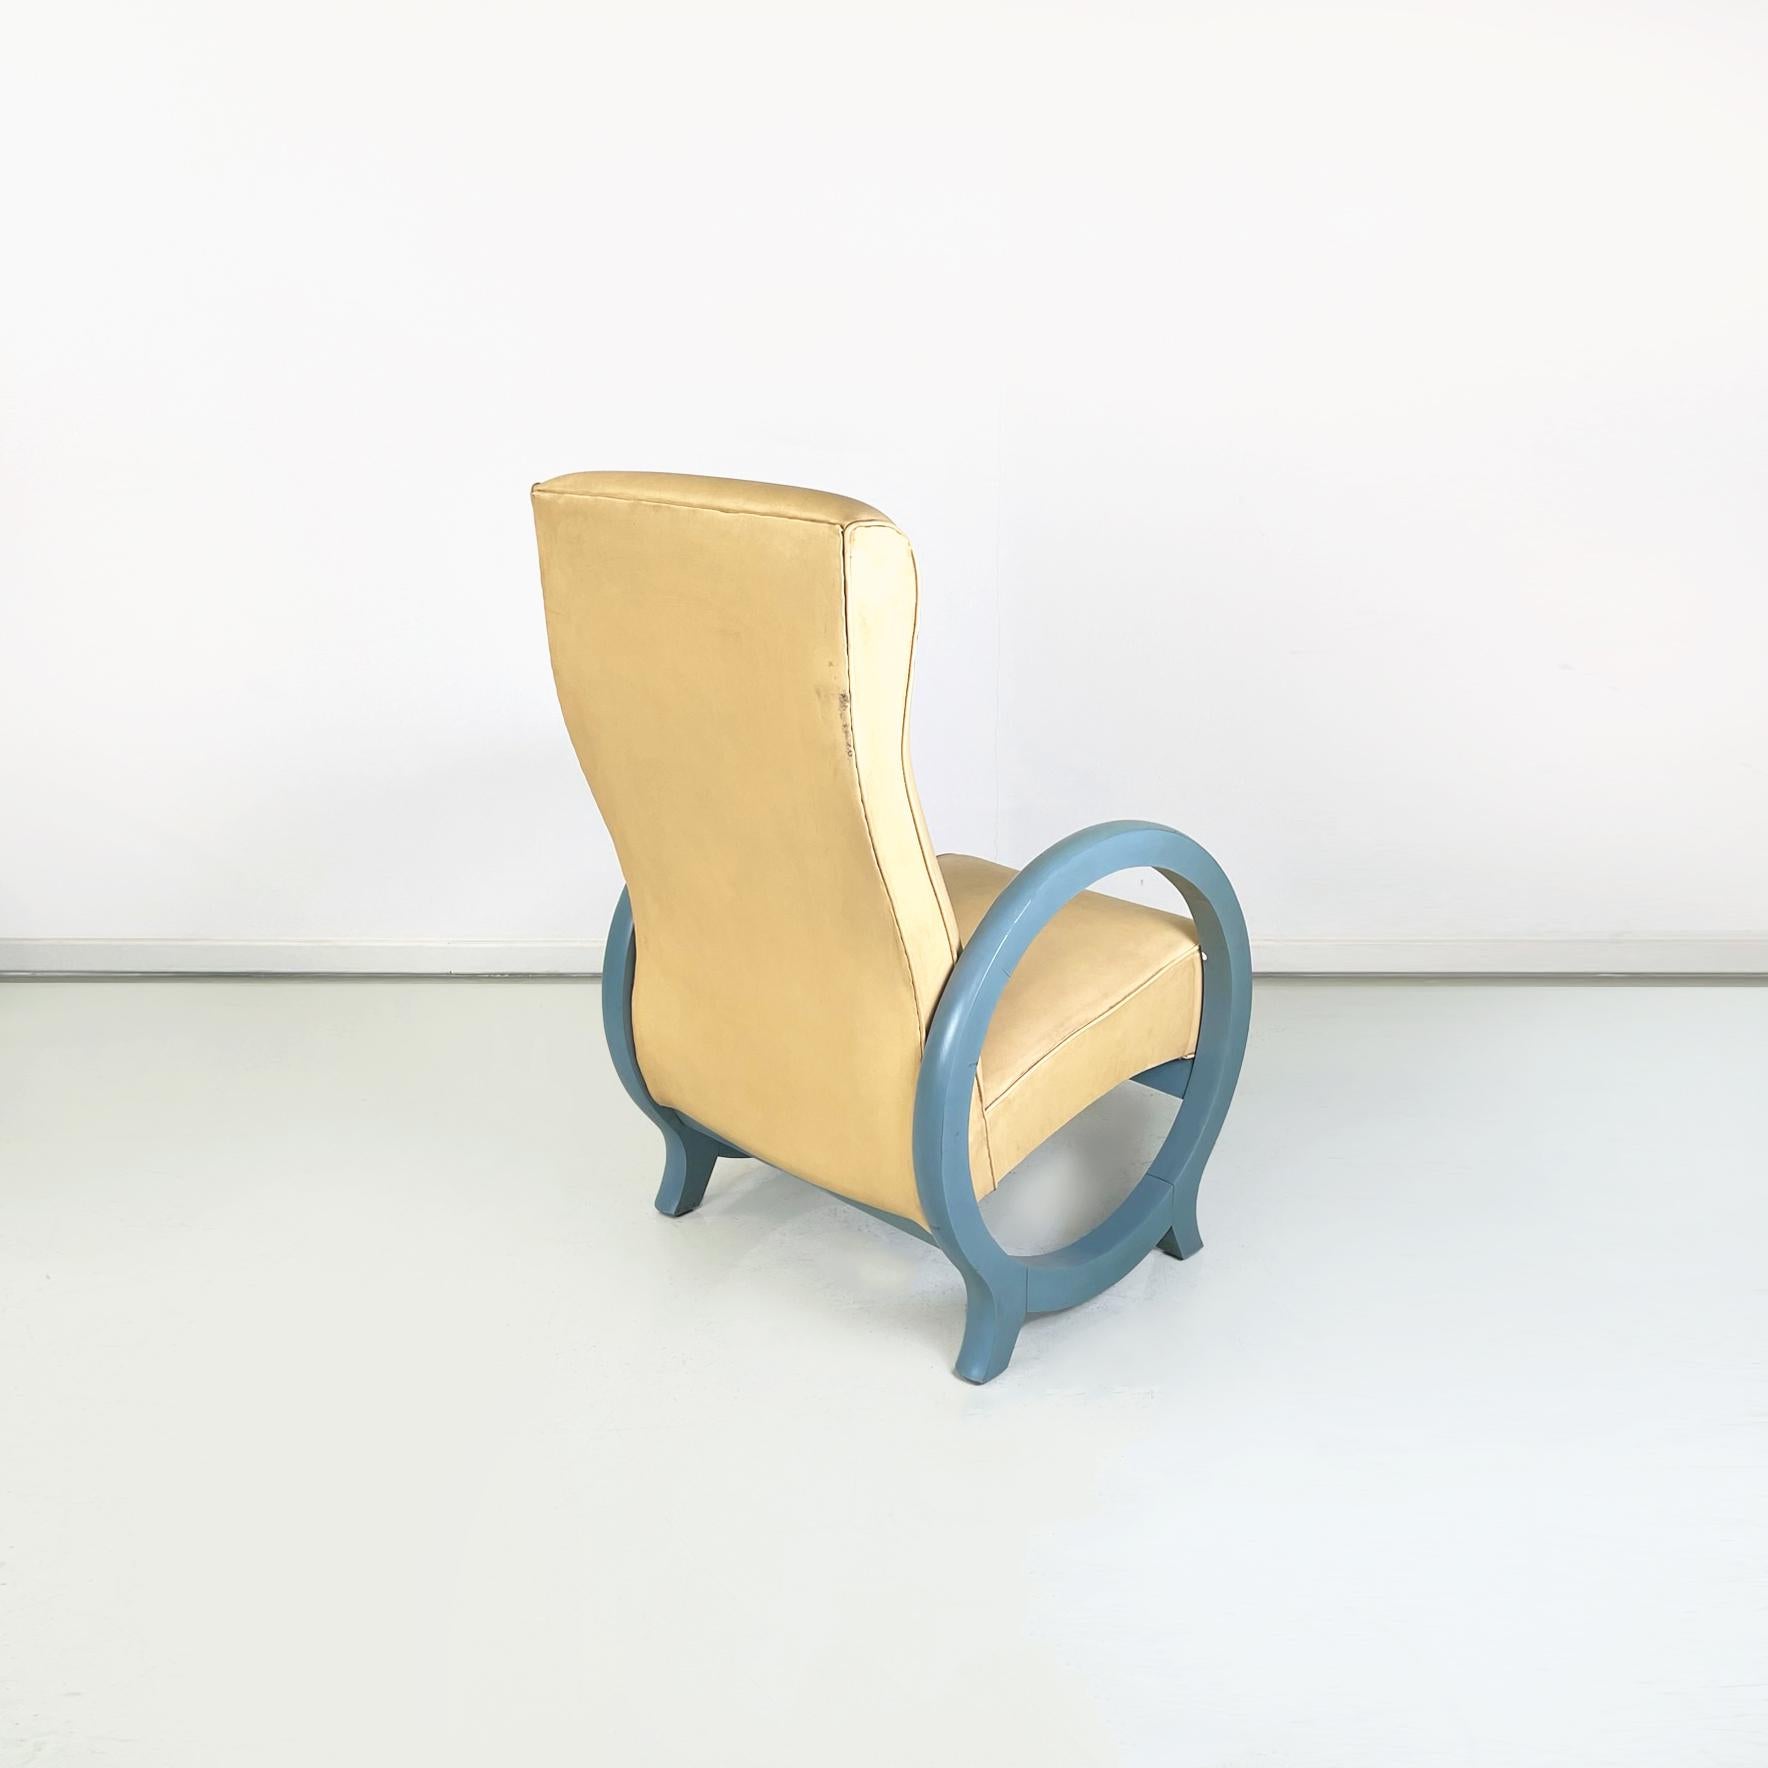 Late 20th Century Italian Modern Armchair in Beige Leather and Light Blue Wood, 1980s For Sale